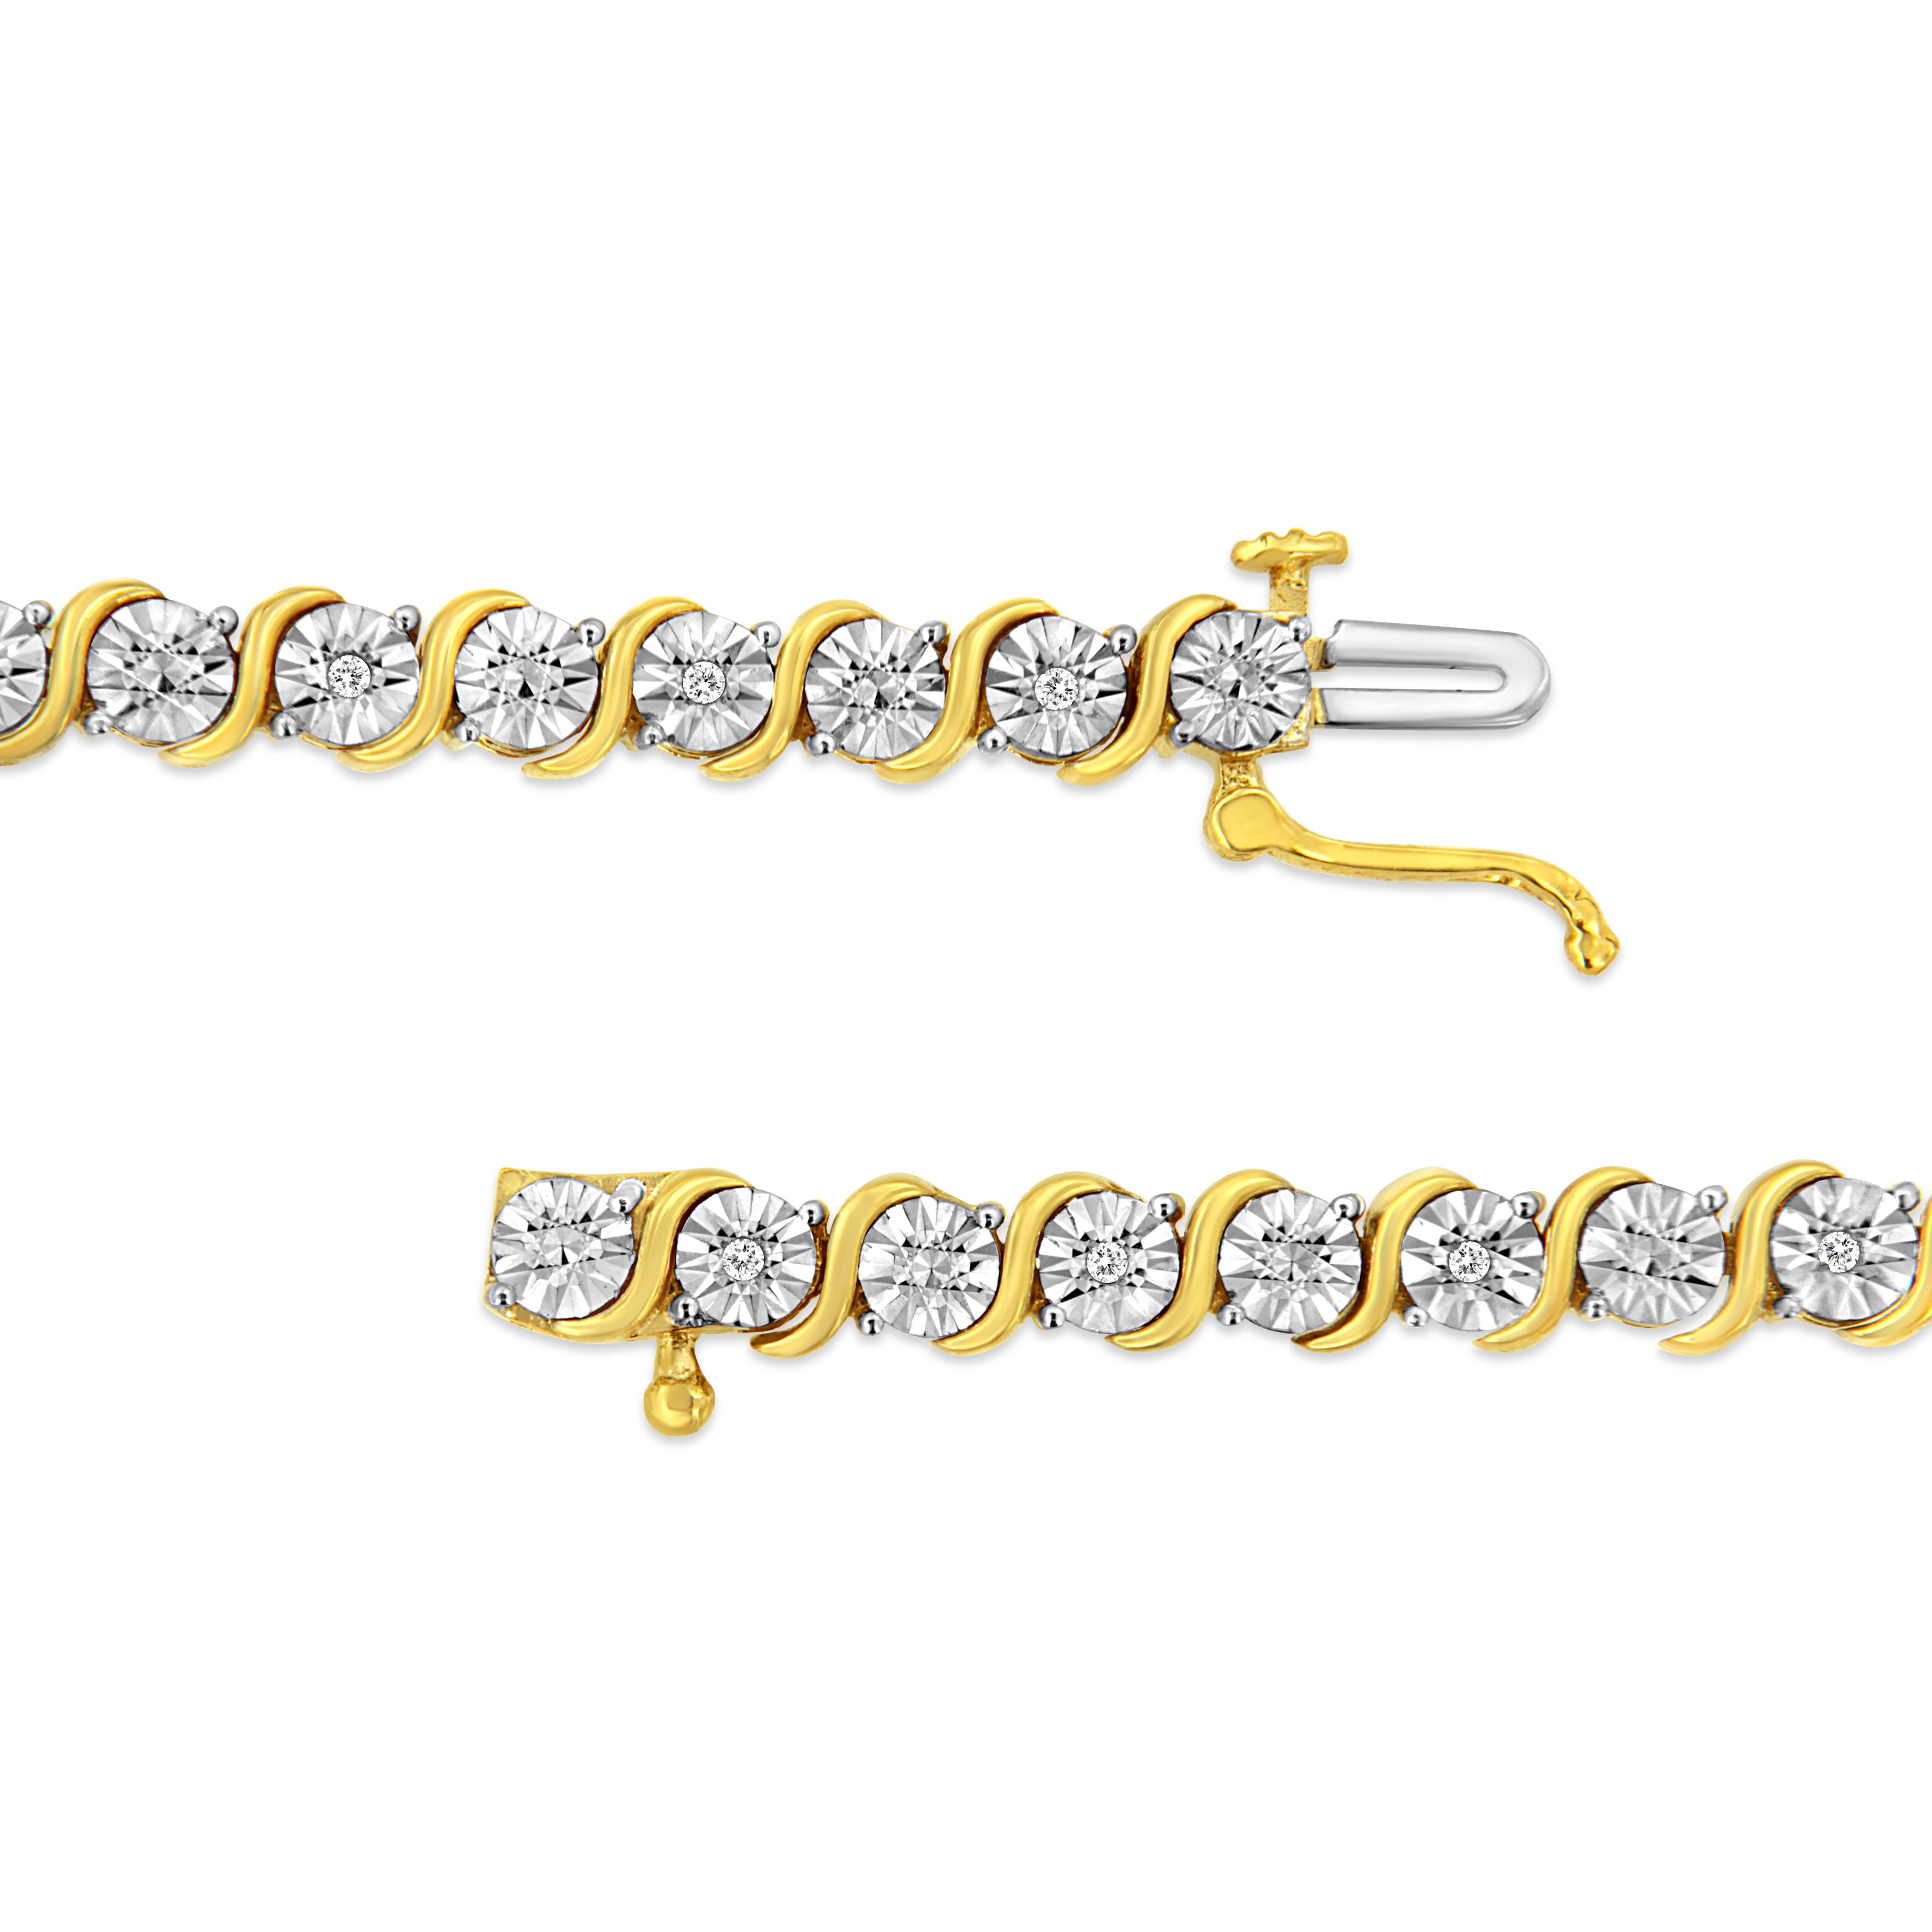 Contemporary 14K Yellow Gold Plated Sterling Silver 1/10 Carat Diamond Link Tennis Bracelet For Sale